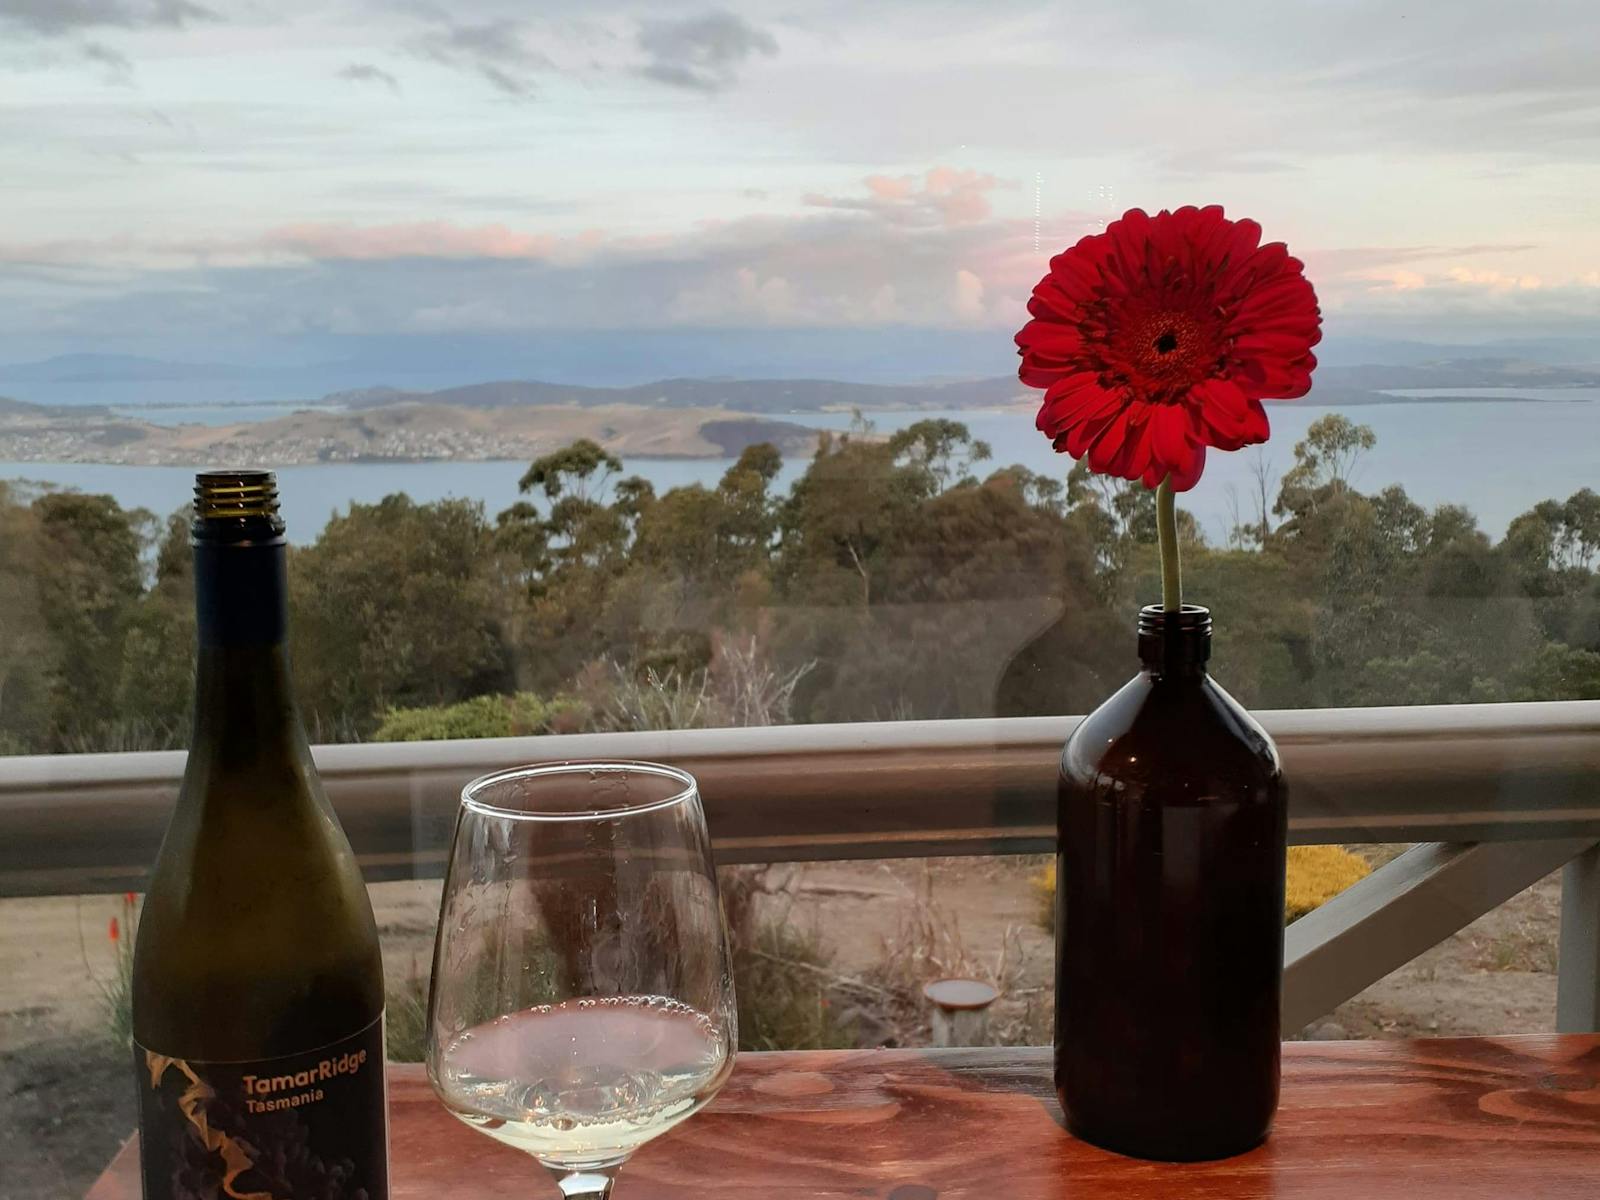 Wining & Dining with a magnificent view